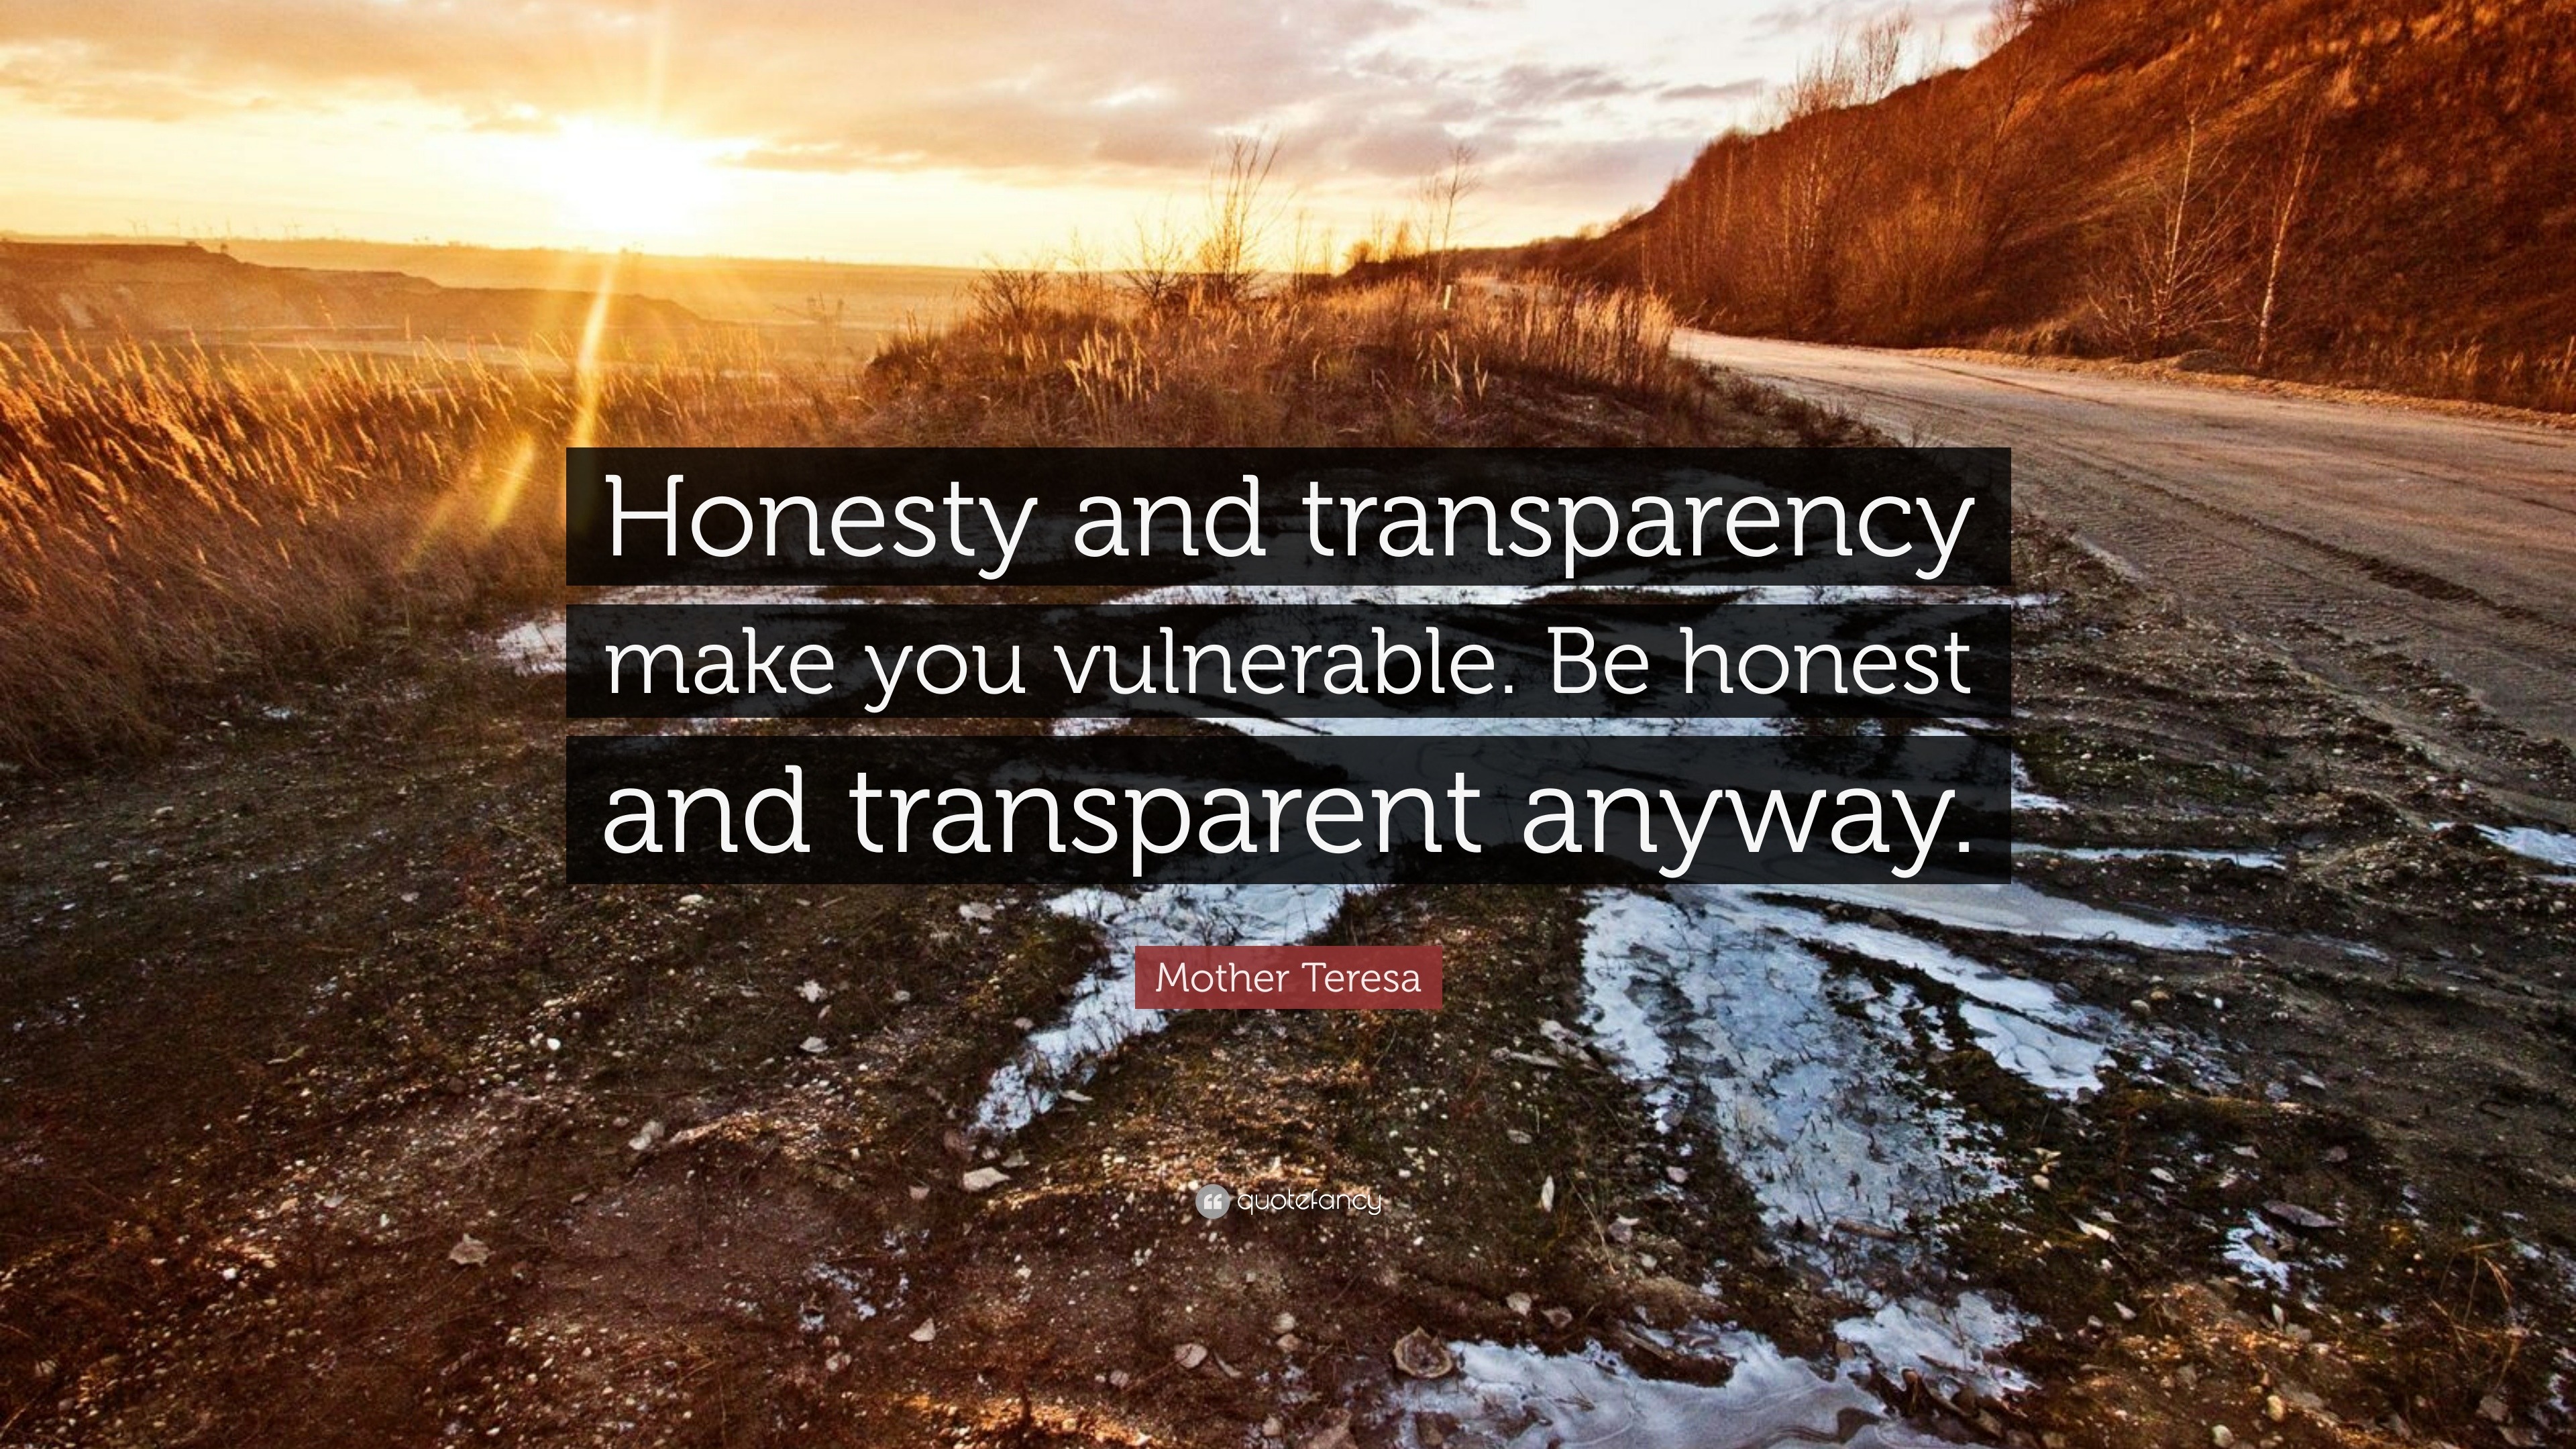 Mother Teresa Quote “Honesty and transparency make you vulnerable Be honest and transparent